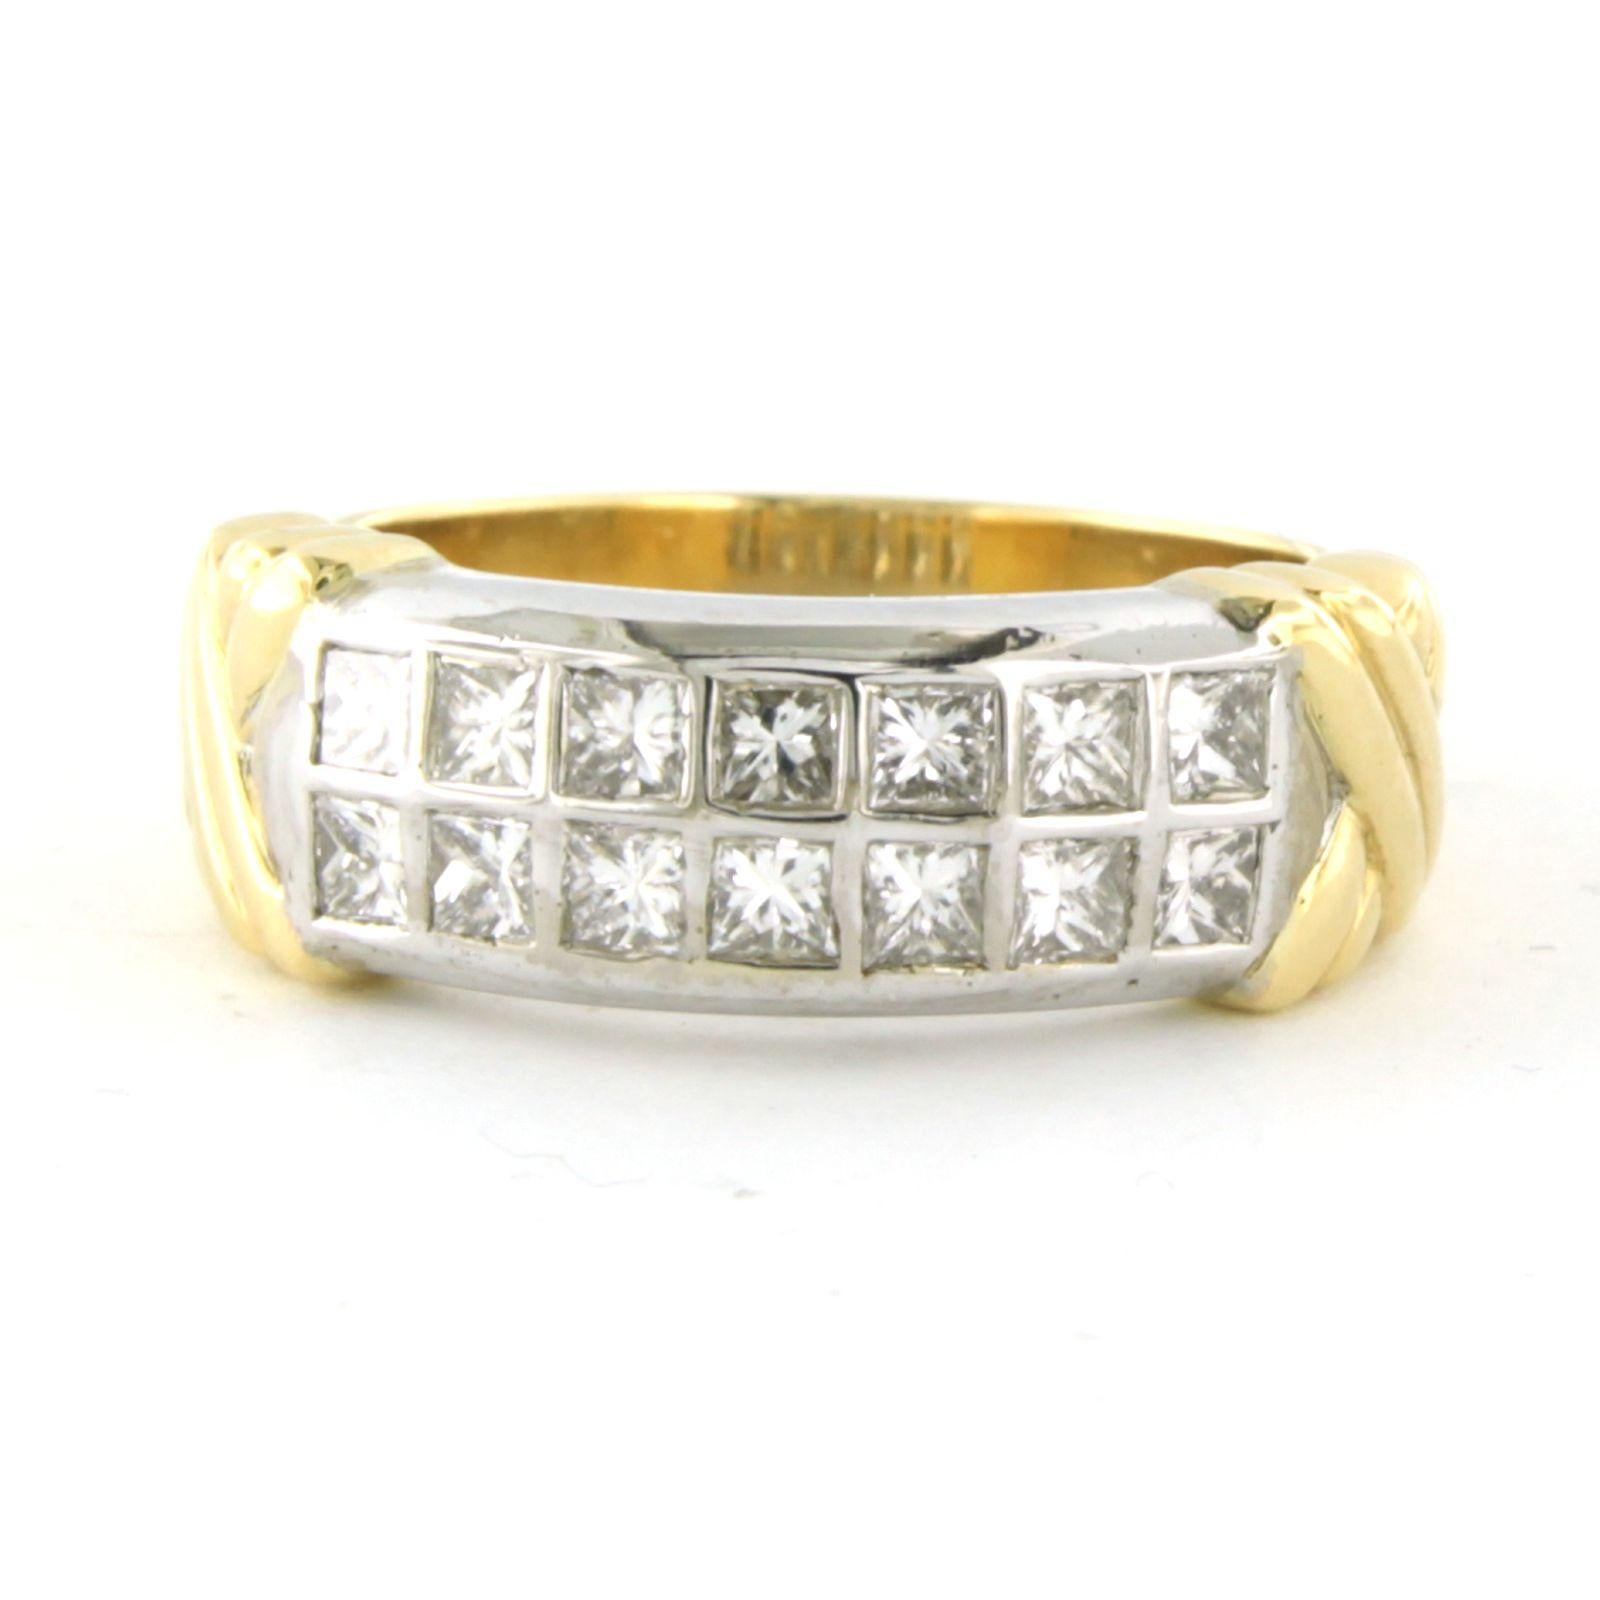 18k bicolor gold ring set with princess cut diamonds. 0.70ct - F/G - VS/SI - ring size U.S. 6 - EU. 16.5(52)

detailed description:

The top of the ring is 7.3 mm wide

weight: 7.7 grams

ring size U.S. 6 - EU. 16.5(52), the ring can be enlarged or